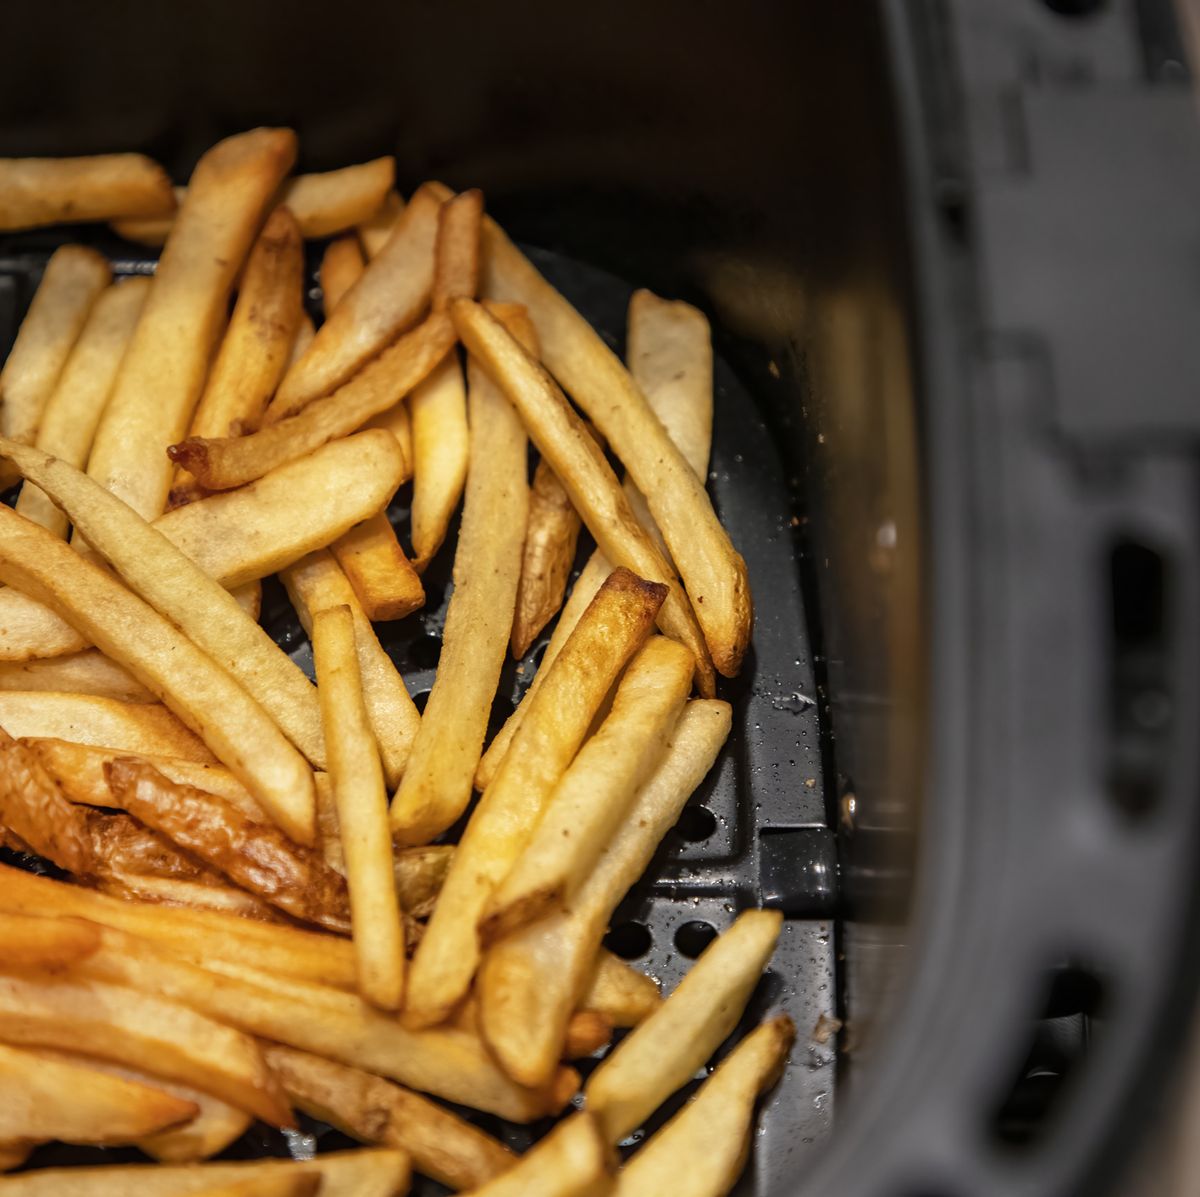 How do I know my Cosori air fryer is at risk of burning? The list